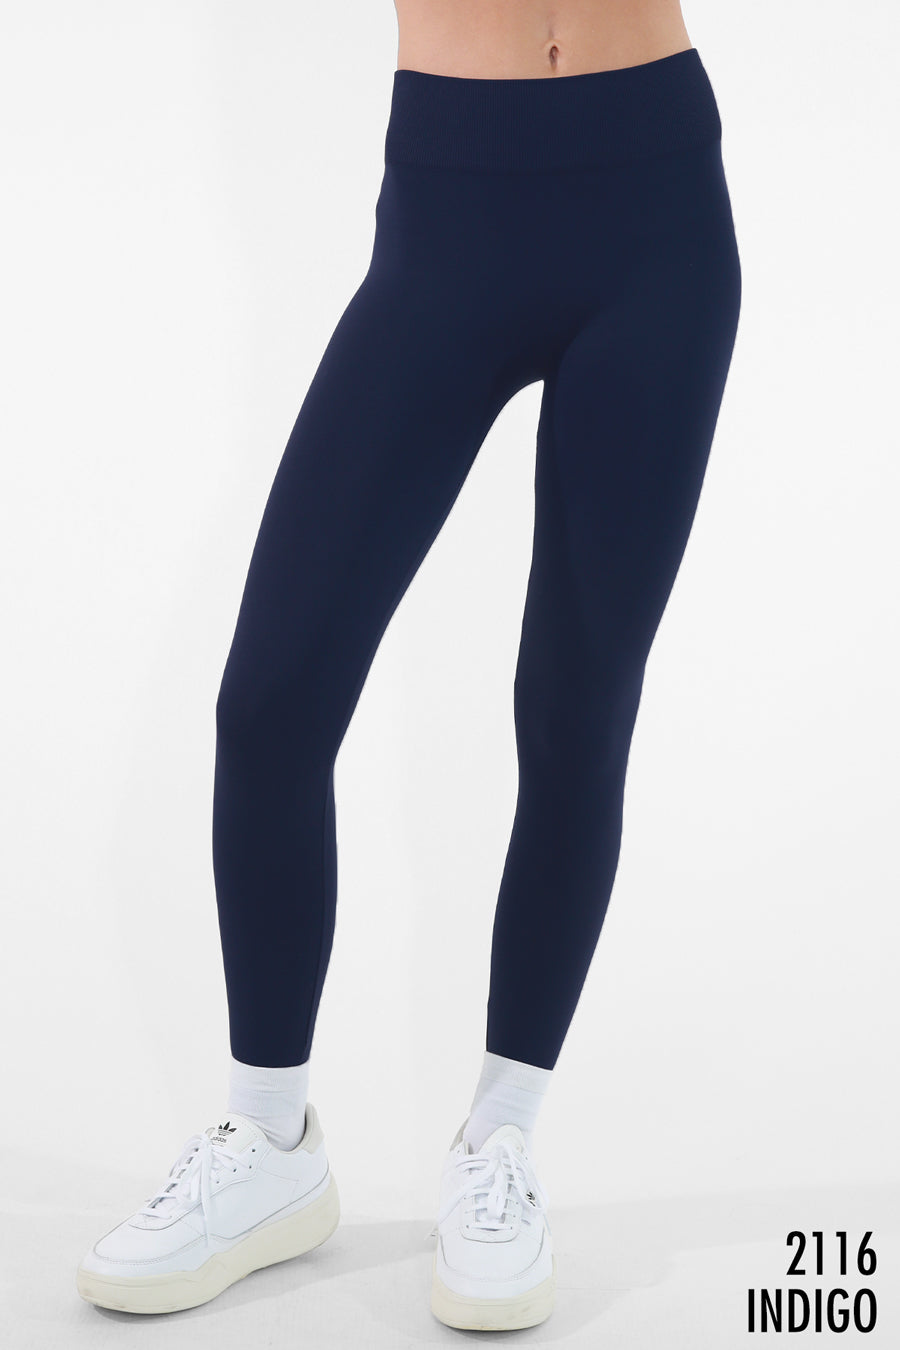 High waisted leggings in the color indigo.